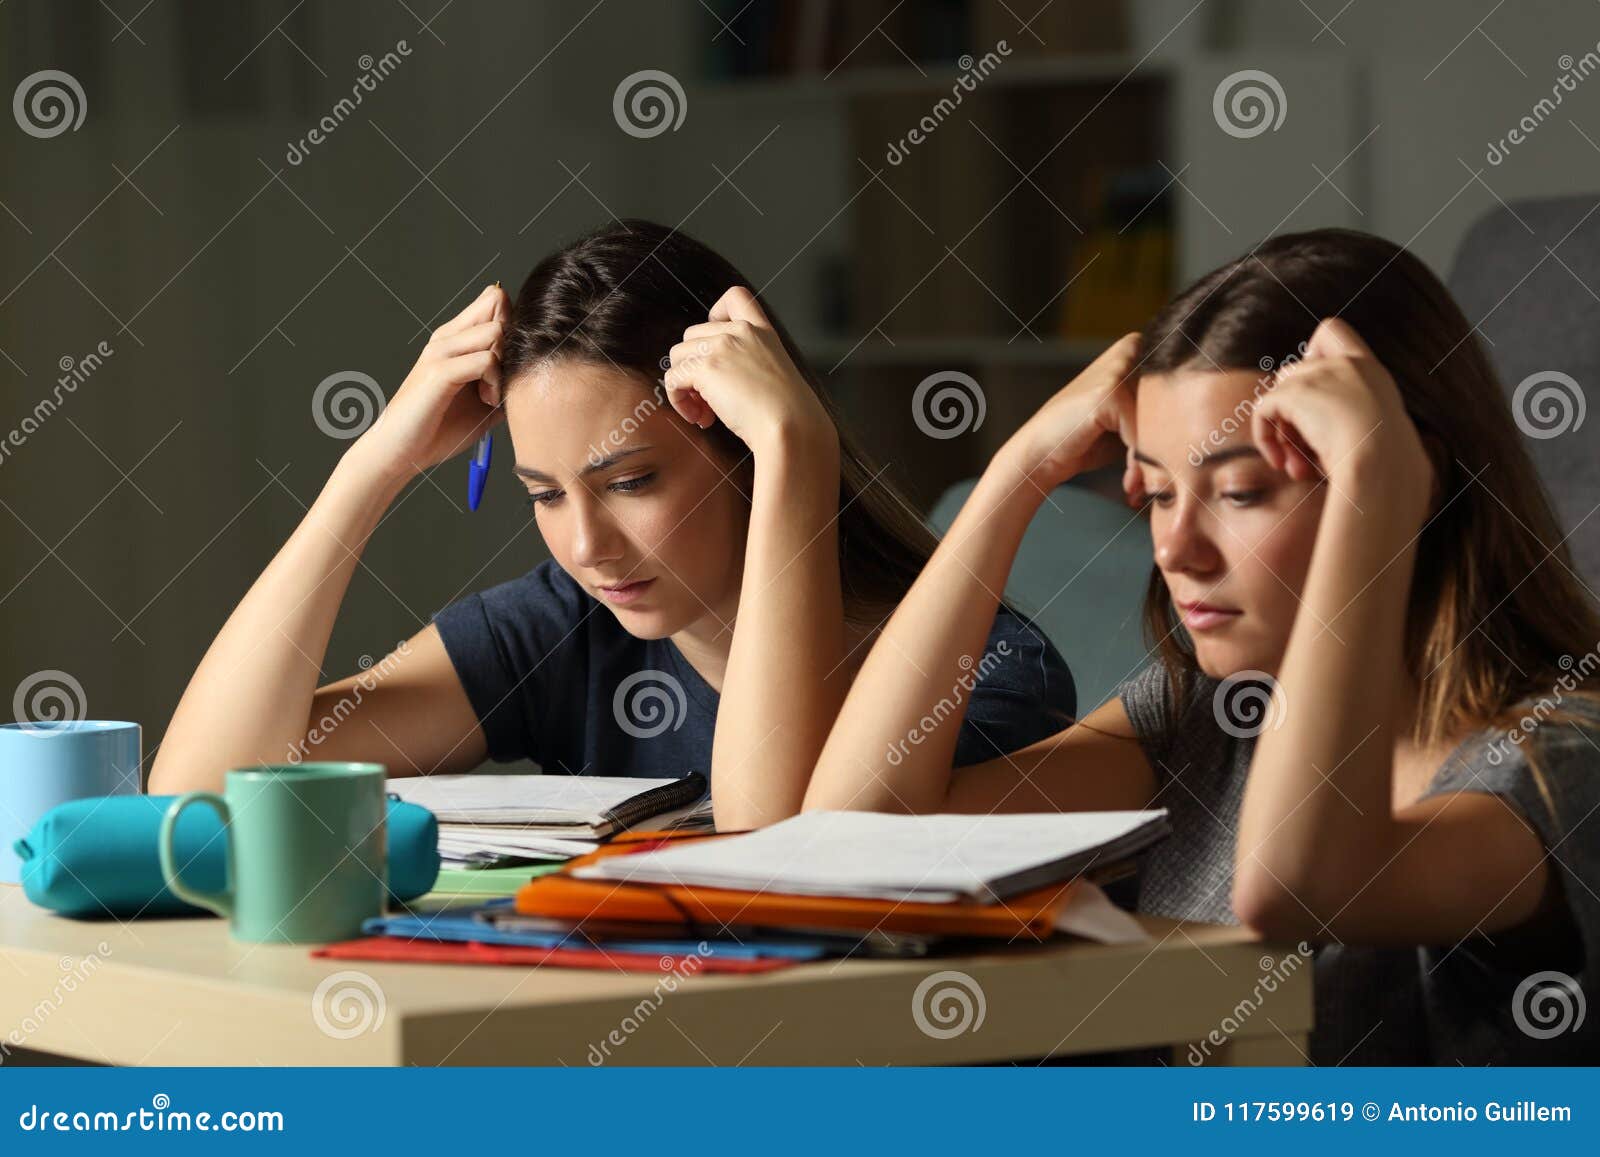 studious students memorizing late hours in the night at home